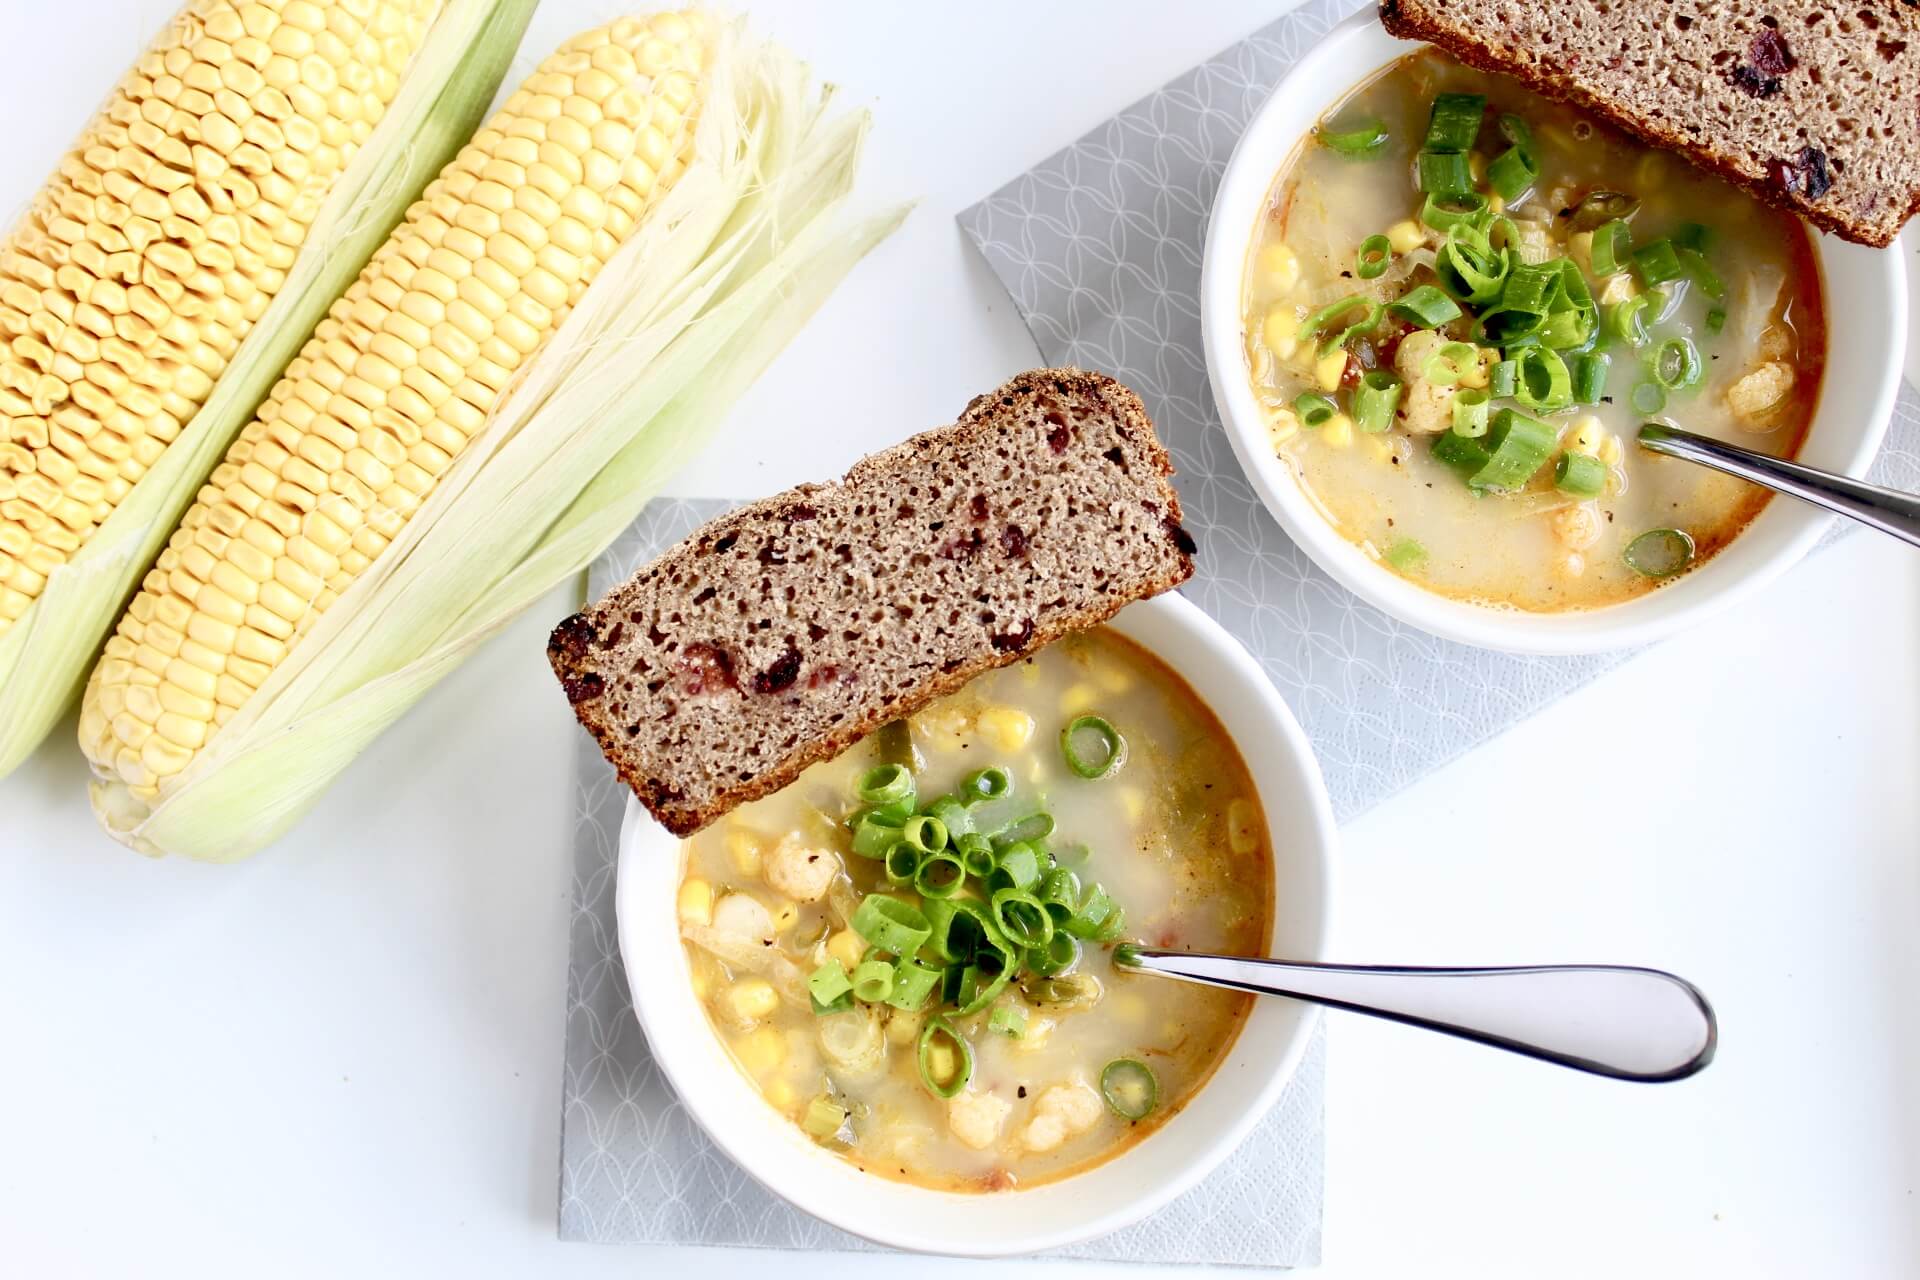 Vegan corn chowder with cauliflower and chili – Easy summer meal